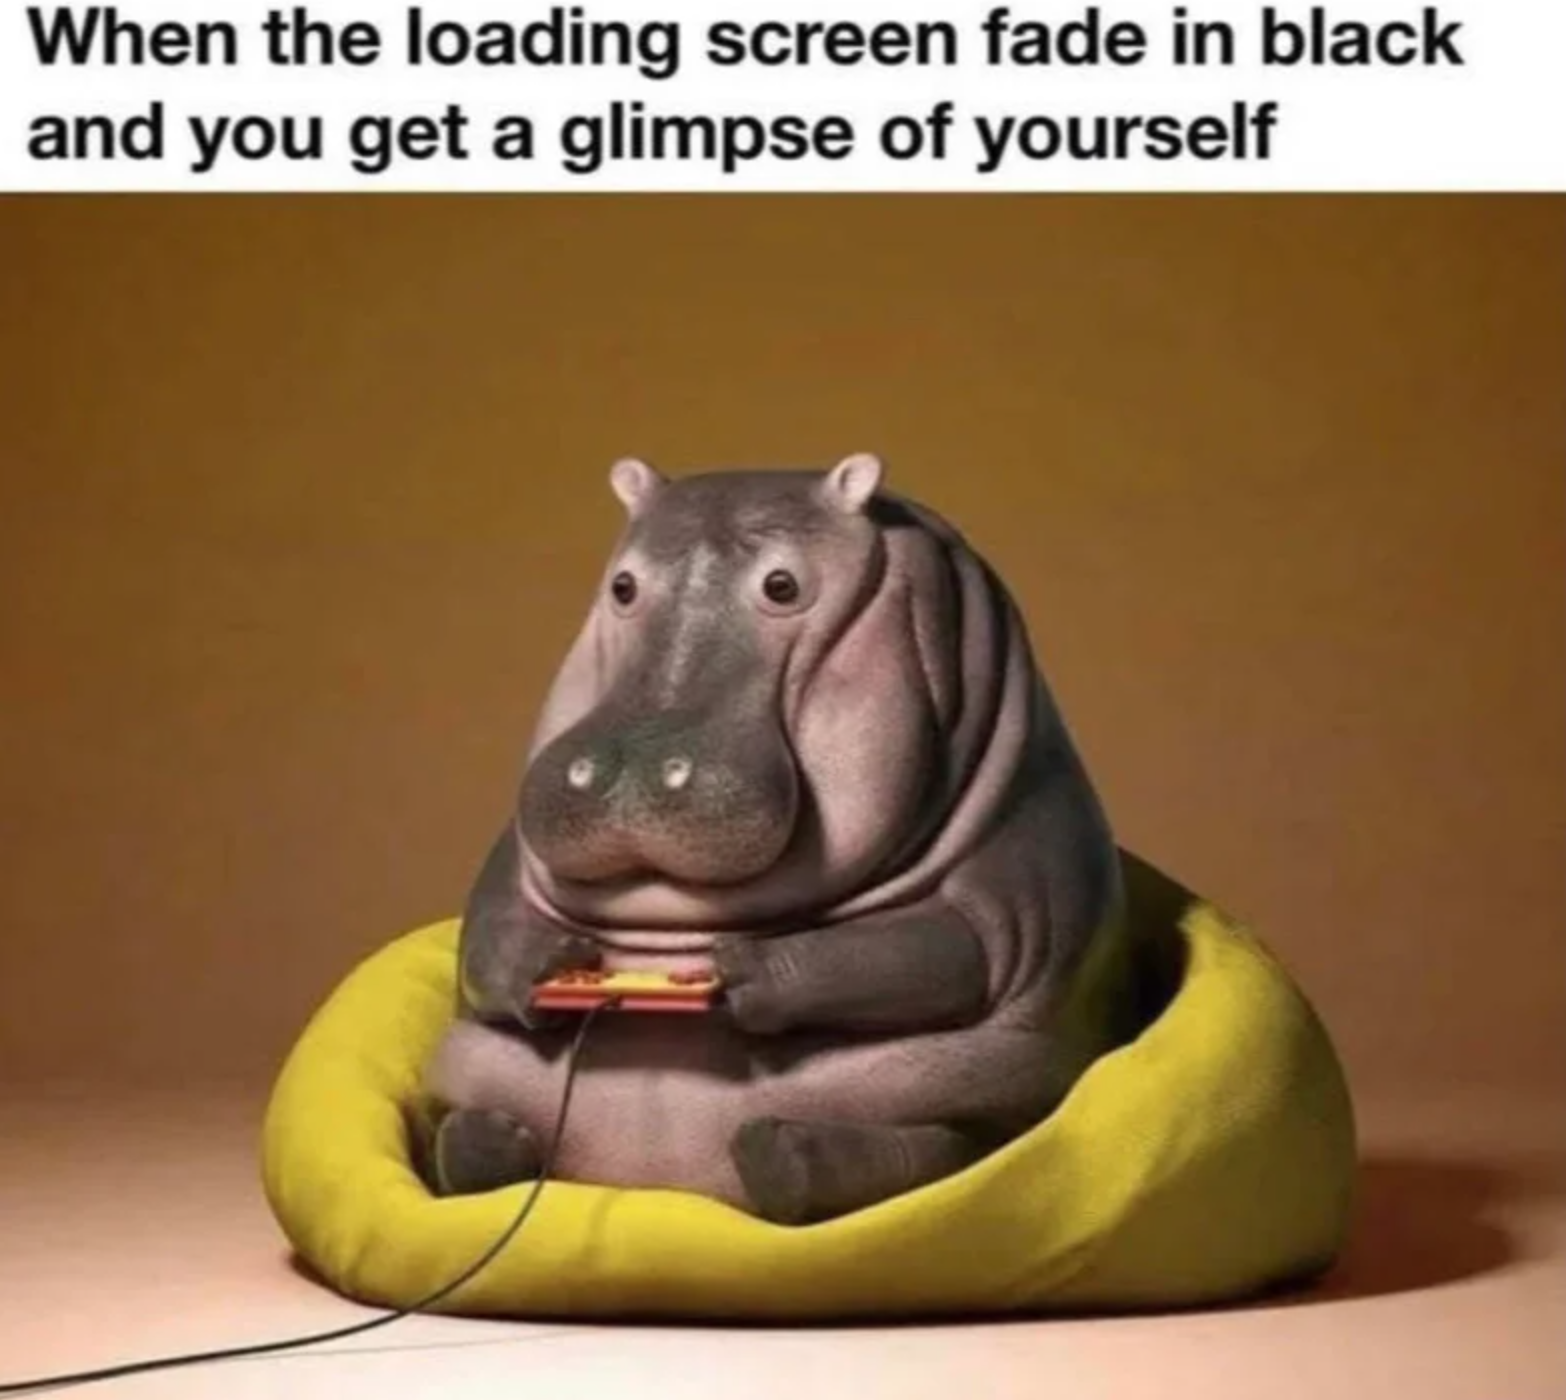 funny gaming memes - hippo on yellow bean bag - When the loading screen fade in black and you get a glimpse of yourself